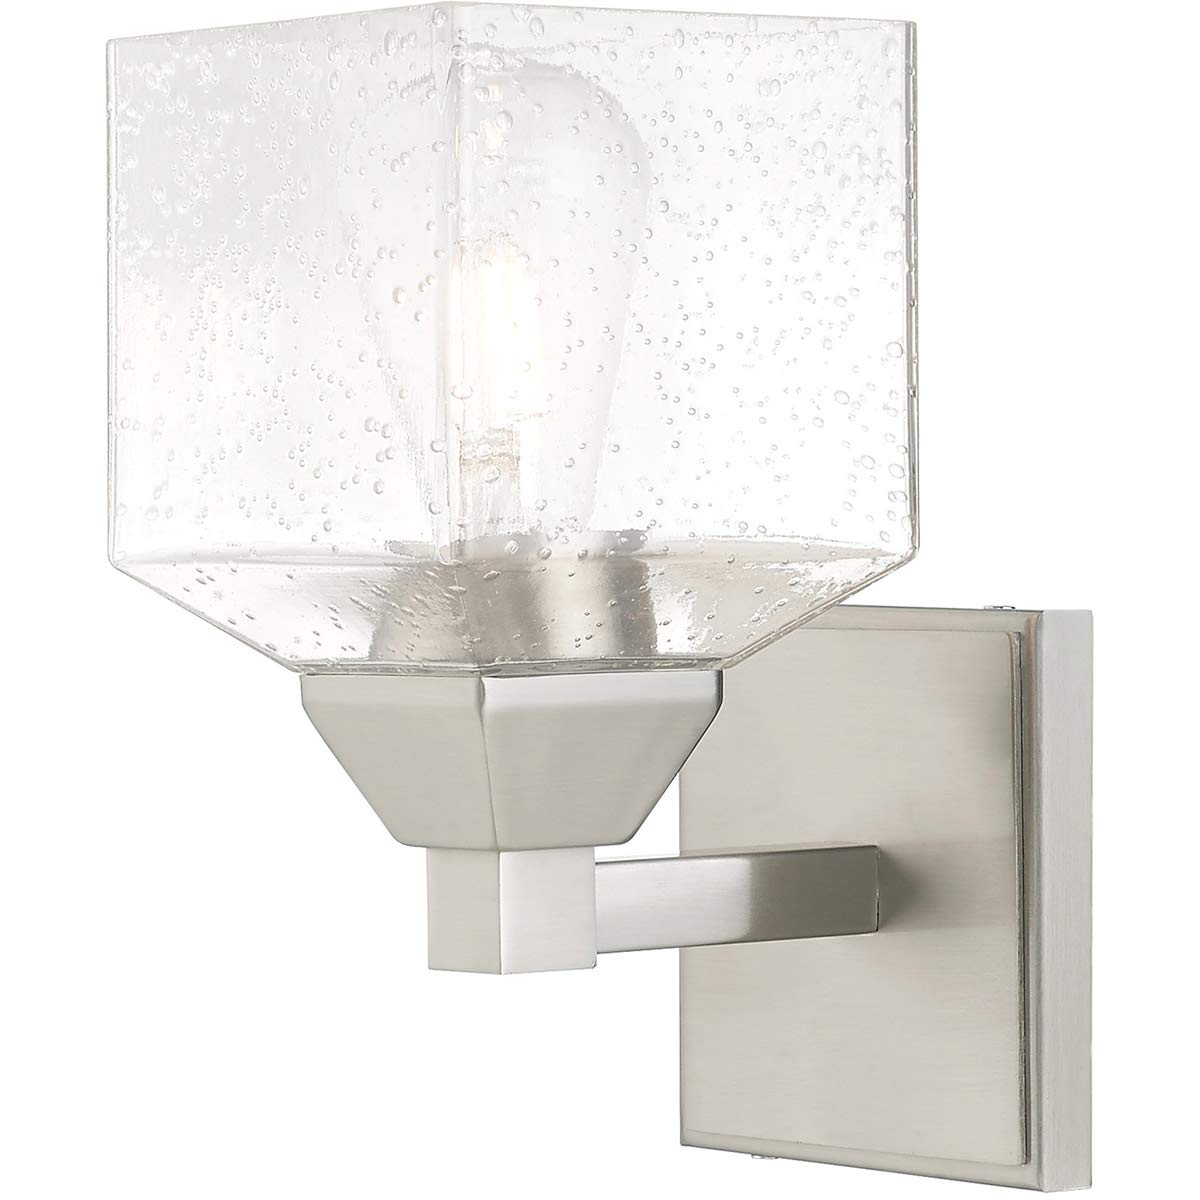 Livex Lighting 10381-91 Aragon - One Light Wall Sconce, Brushed Nickel Finish with Clear Seeded Glass